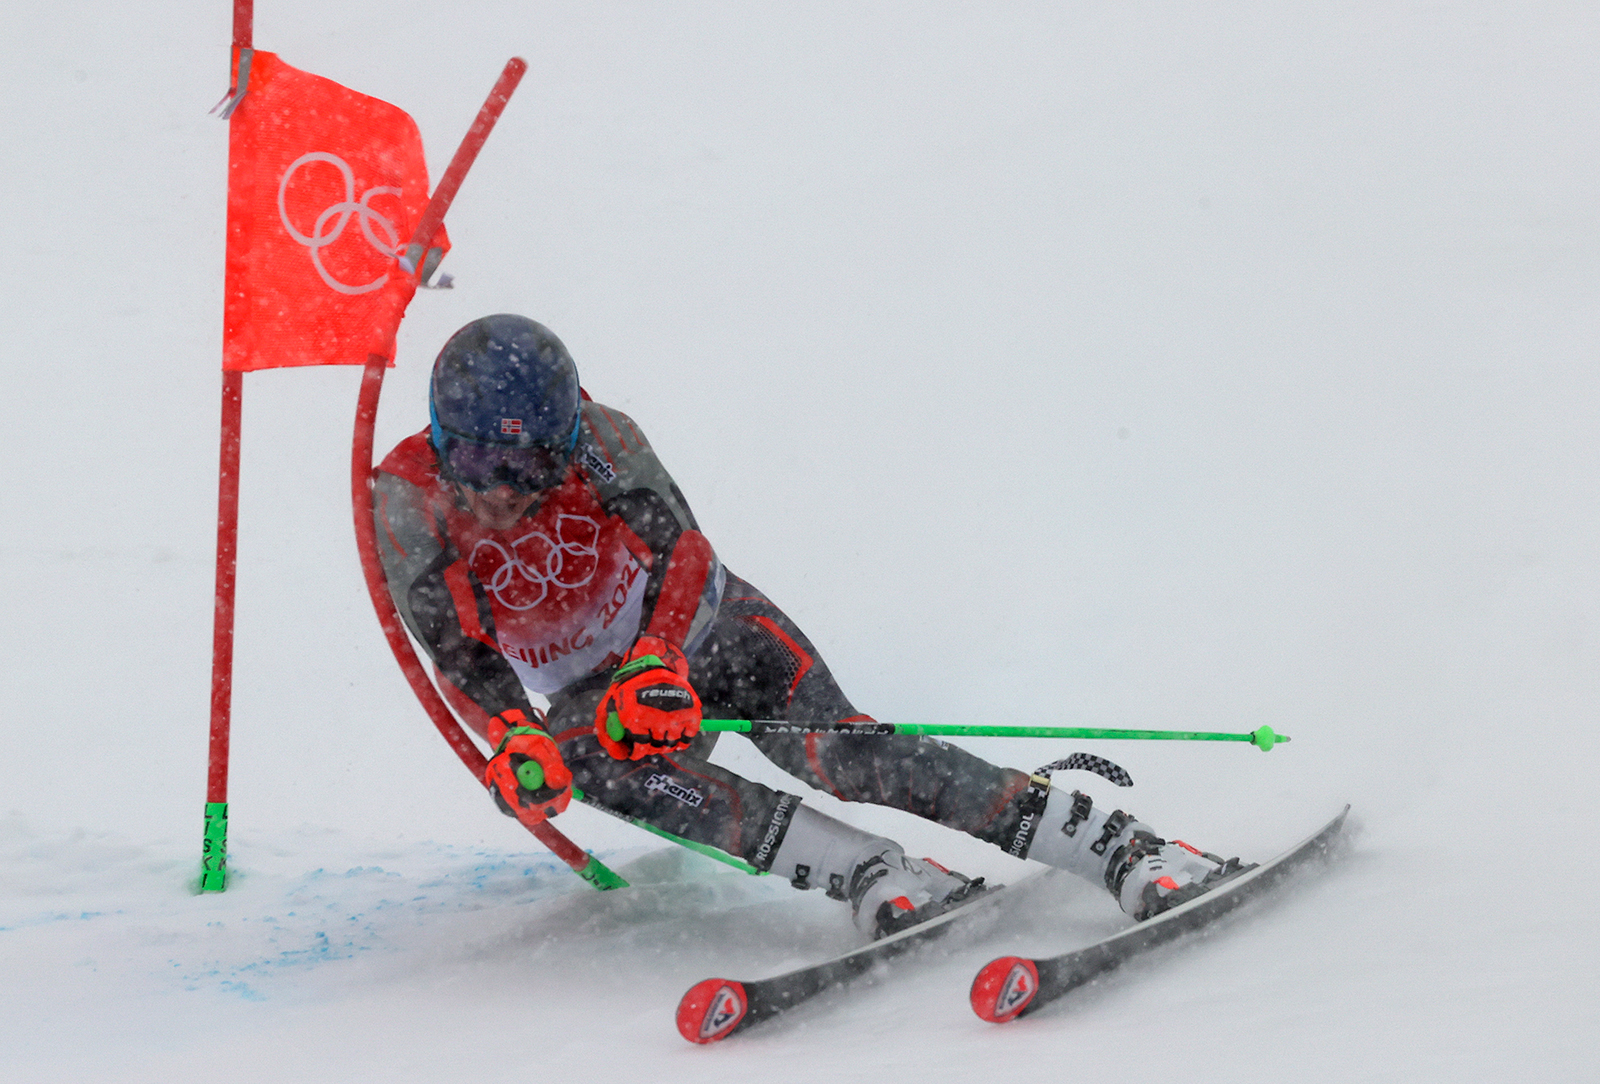 Henrik Kristoffersen of Norway passes a gate during the first run of the men's giant slalom on February 13.